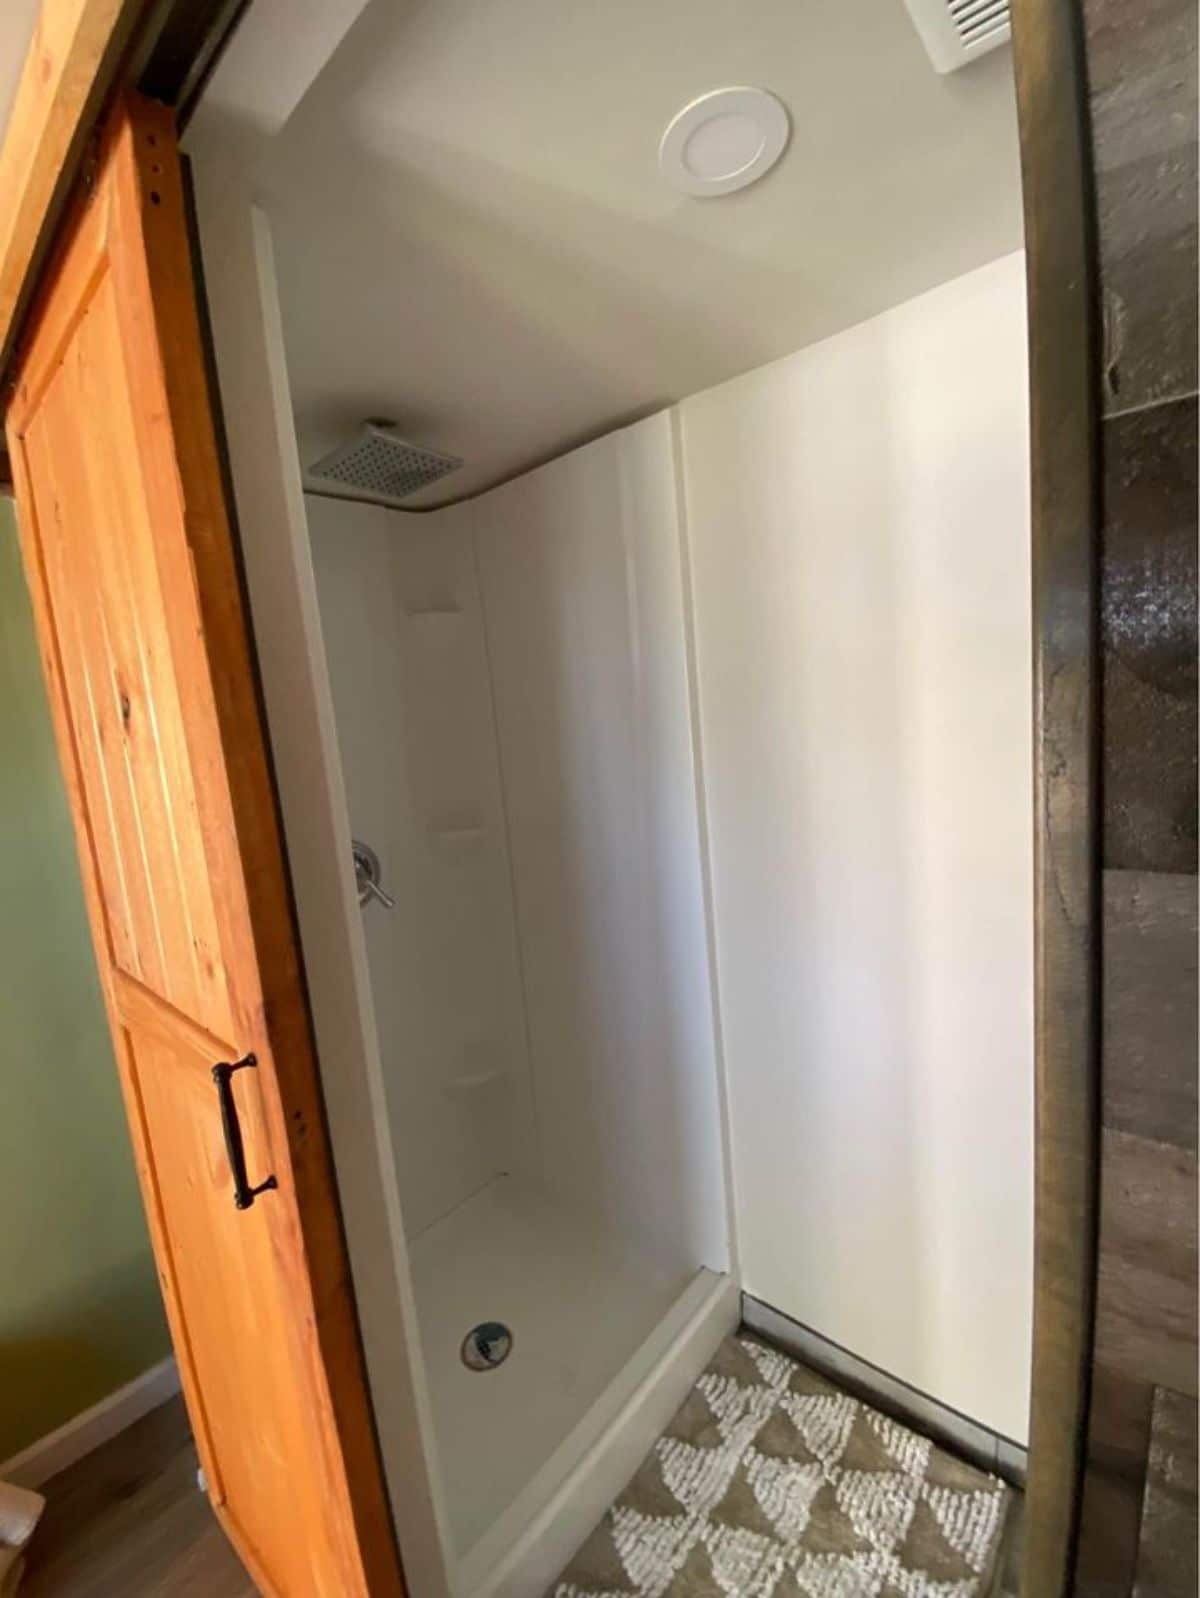 Bathroom and toilet area of tiny home